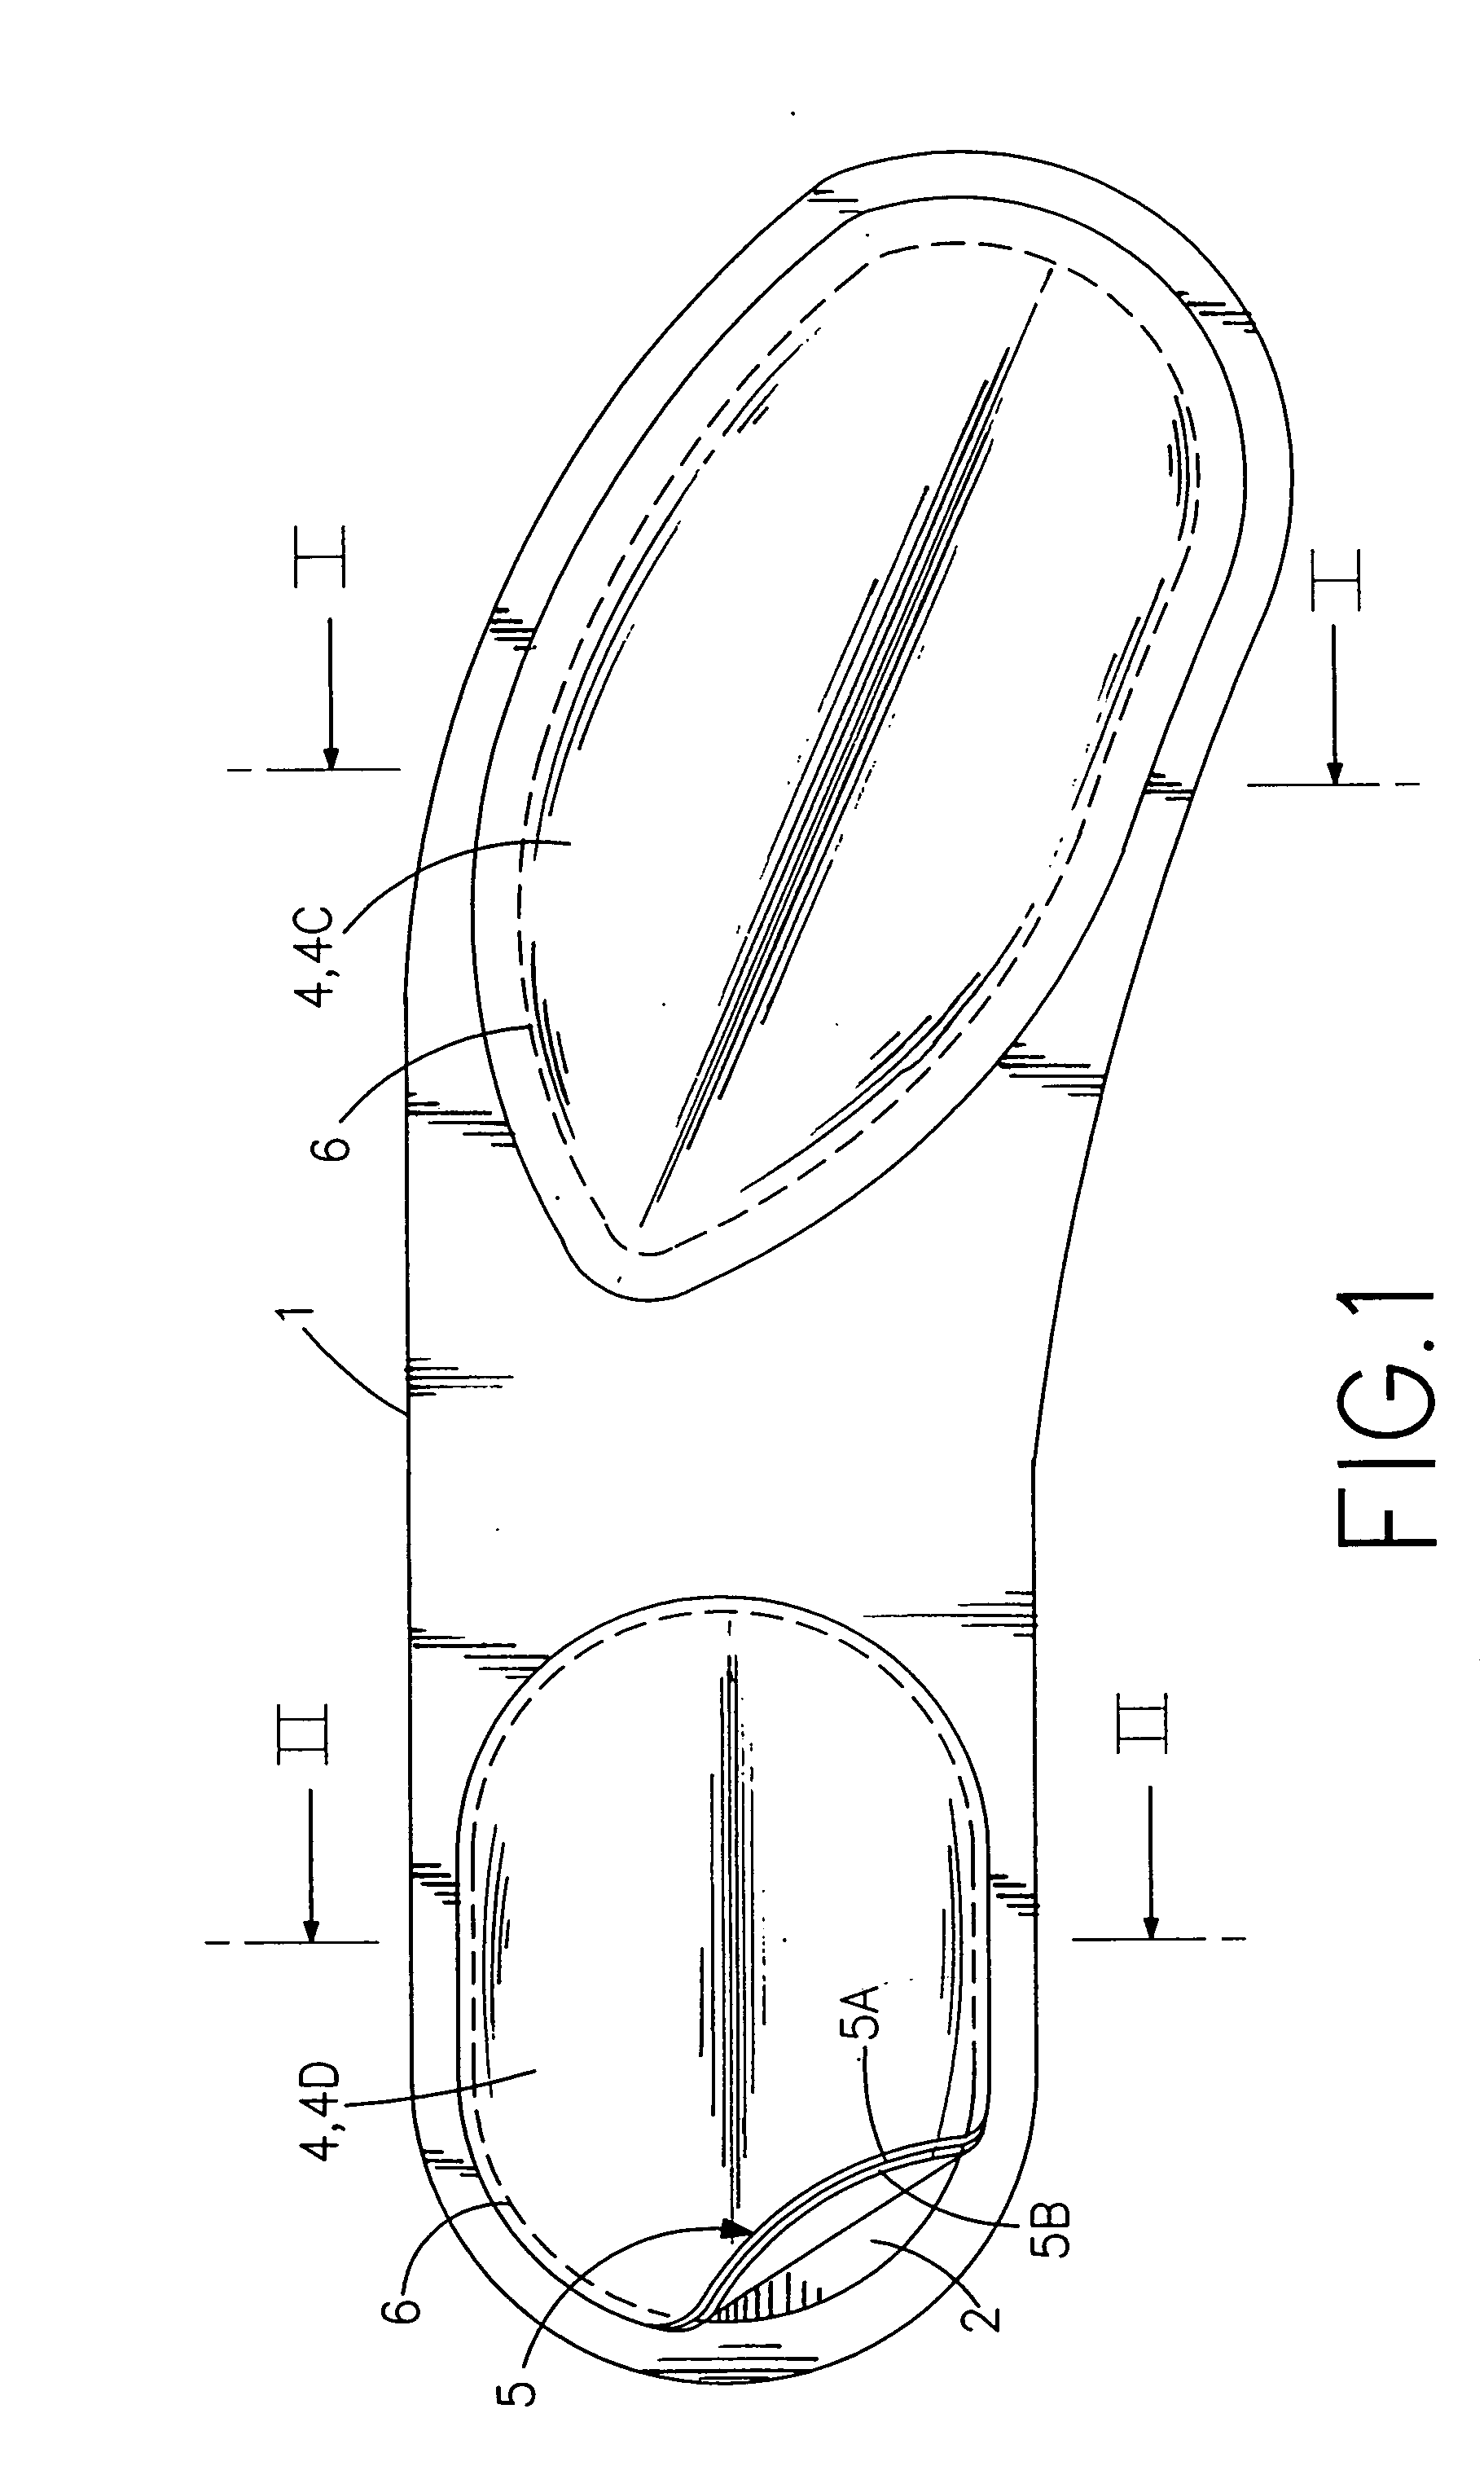 Therapeutic shoe sole design, method for manufacturing the same, and products constructed therefrom